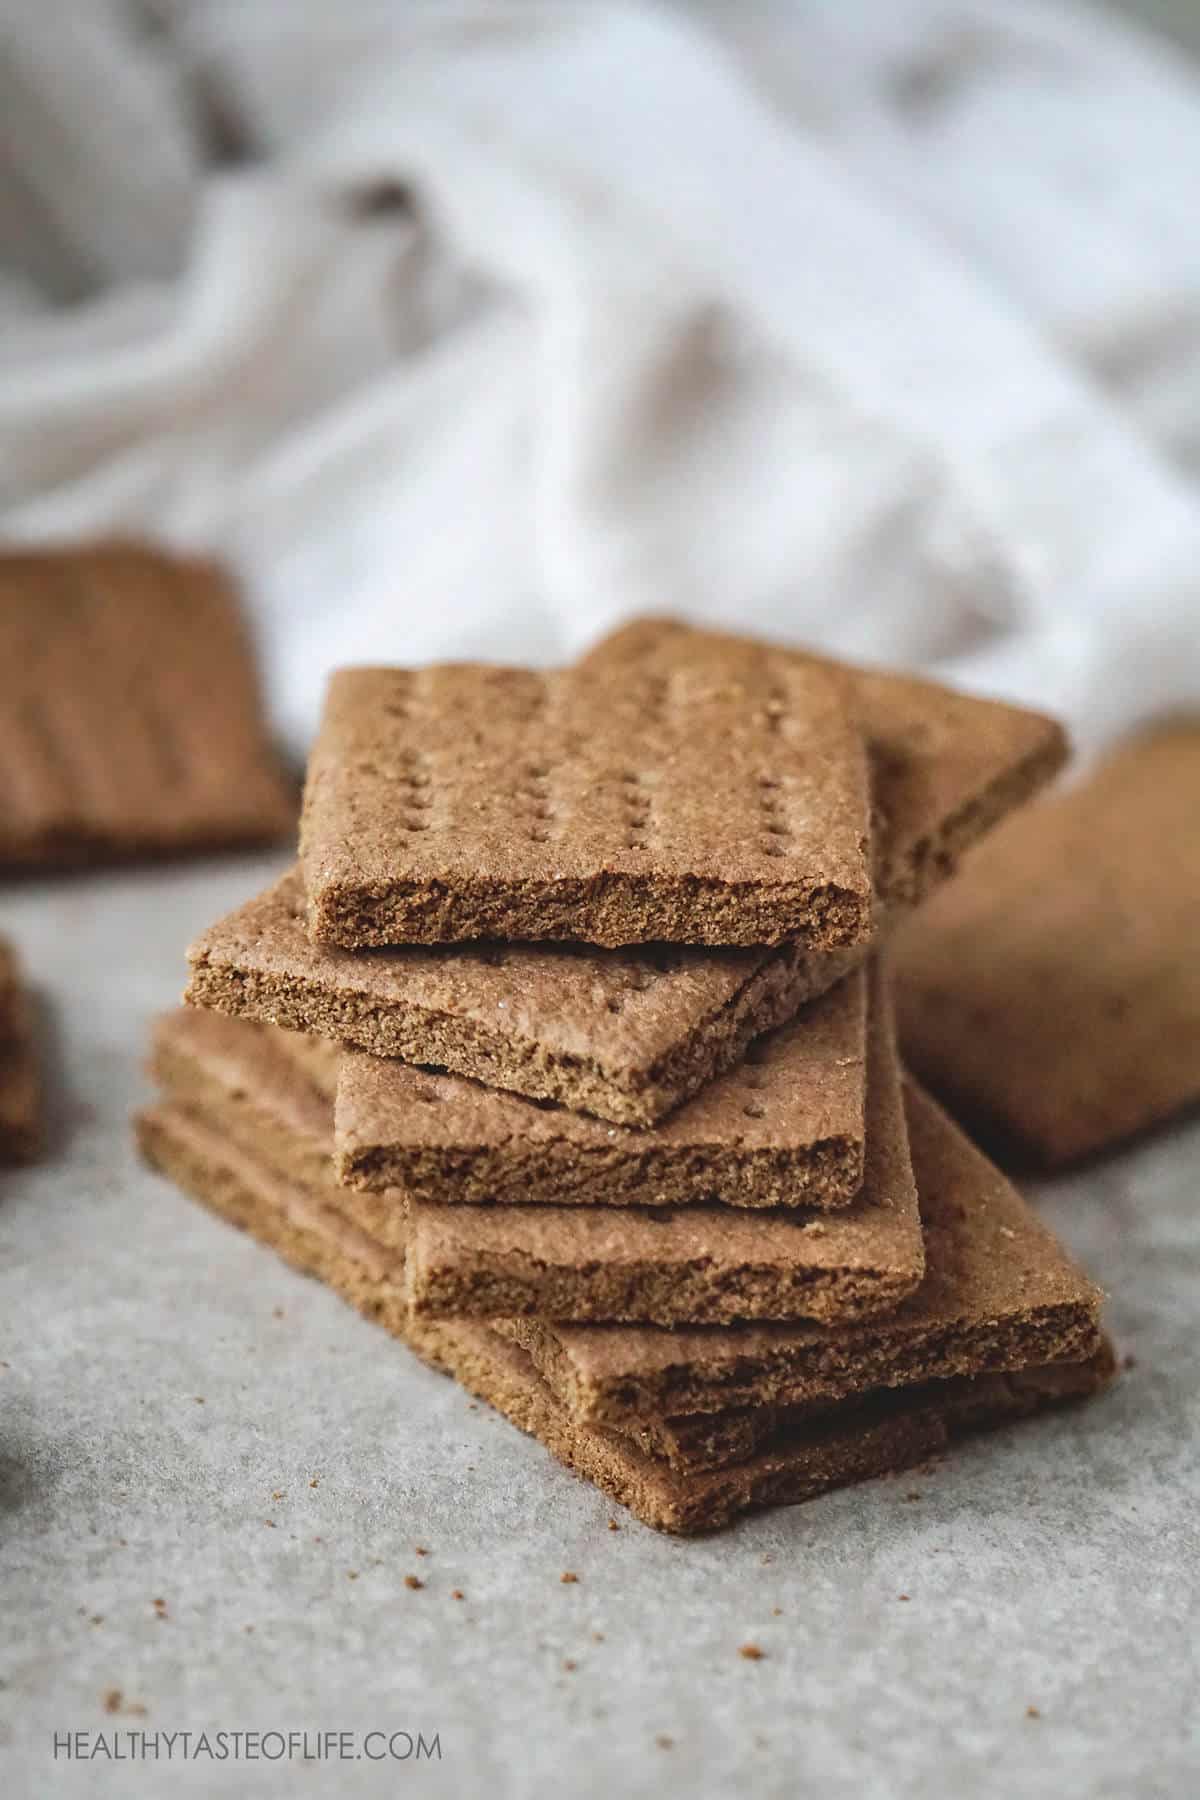 Healthy gluten free graham crackers – dairy free, soy free, egg free, refined sugar free gf graham crackers with cinnamon and maple flavor.